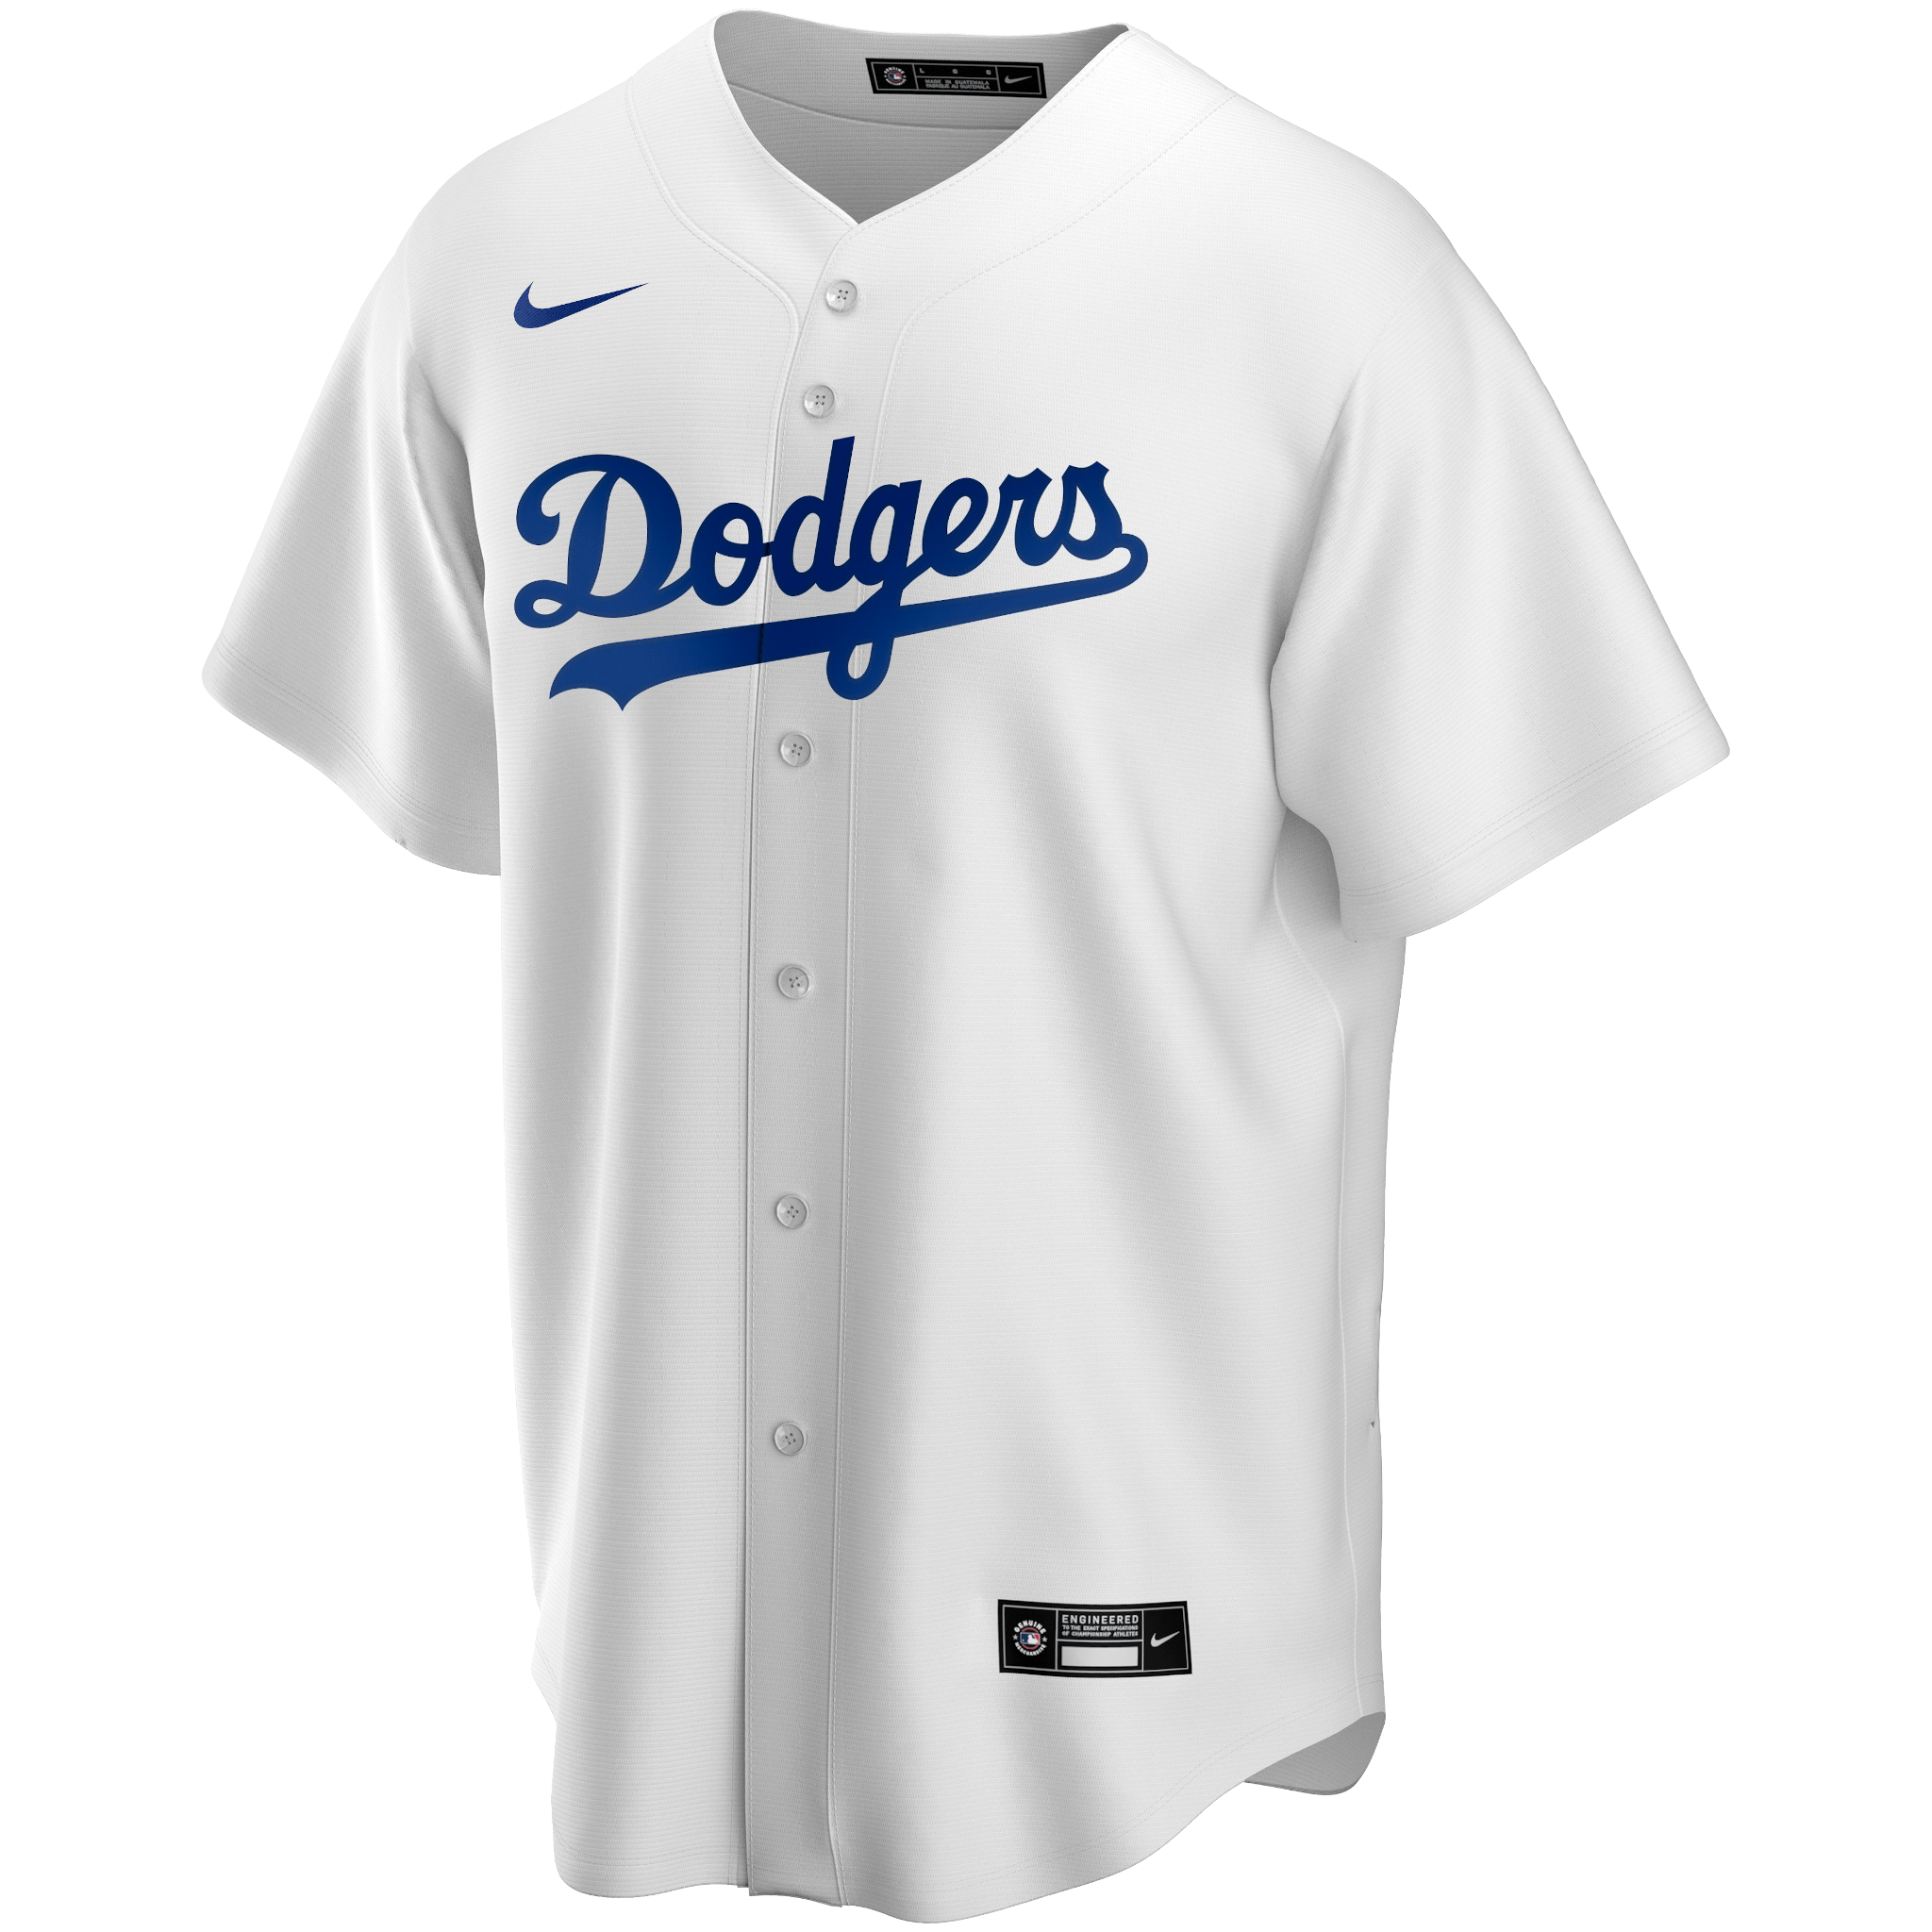 dodgers jackie robinson day jersey